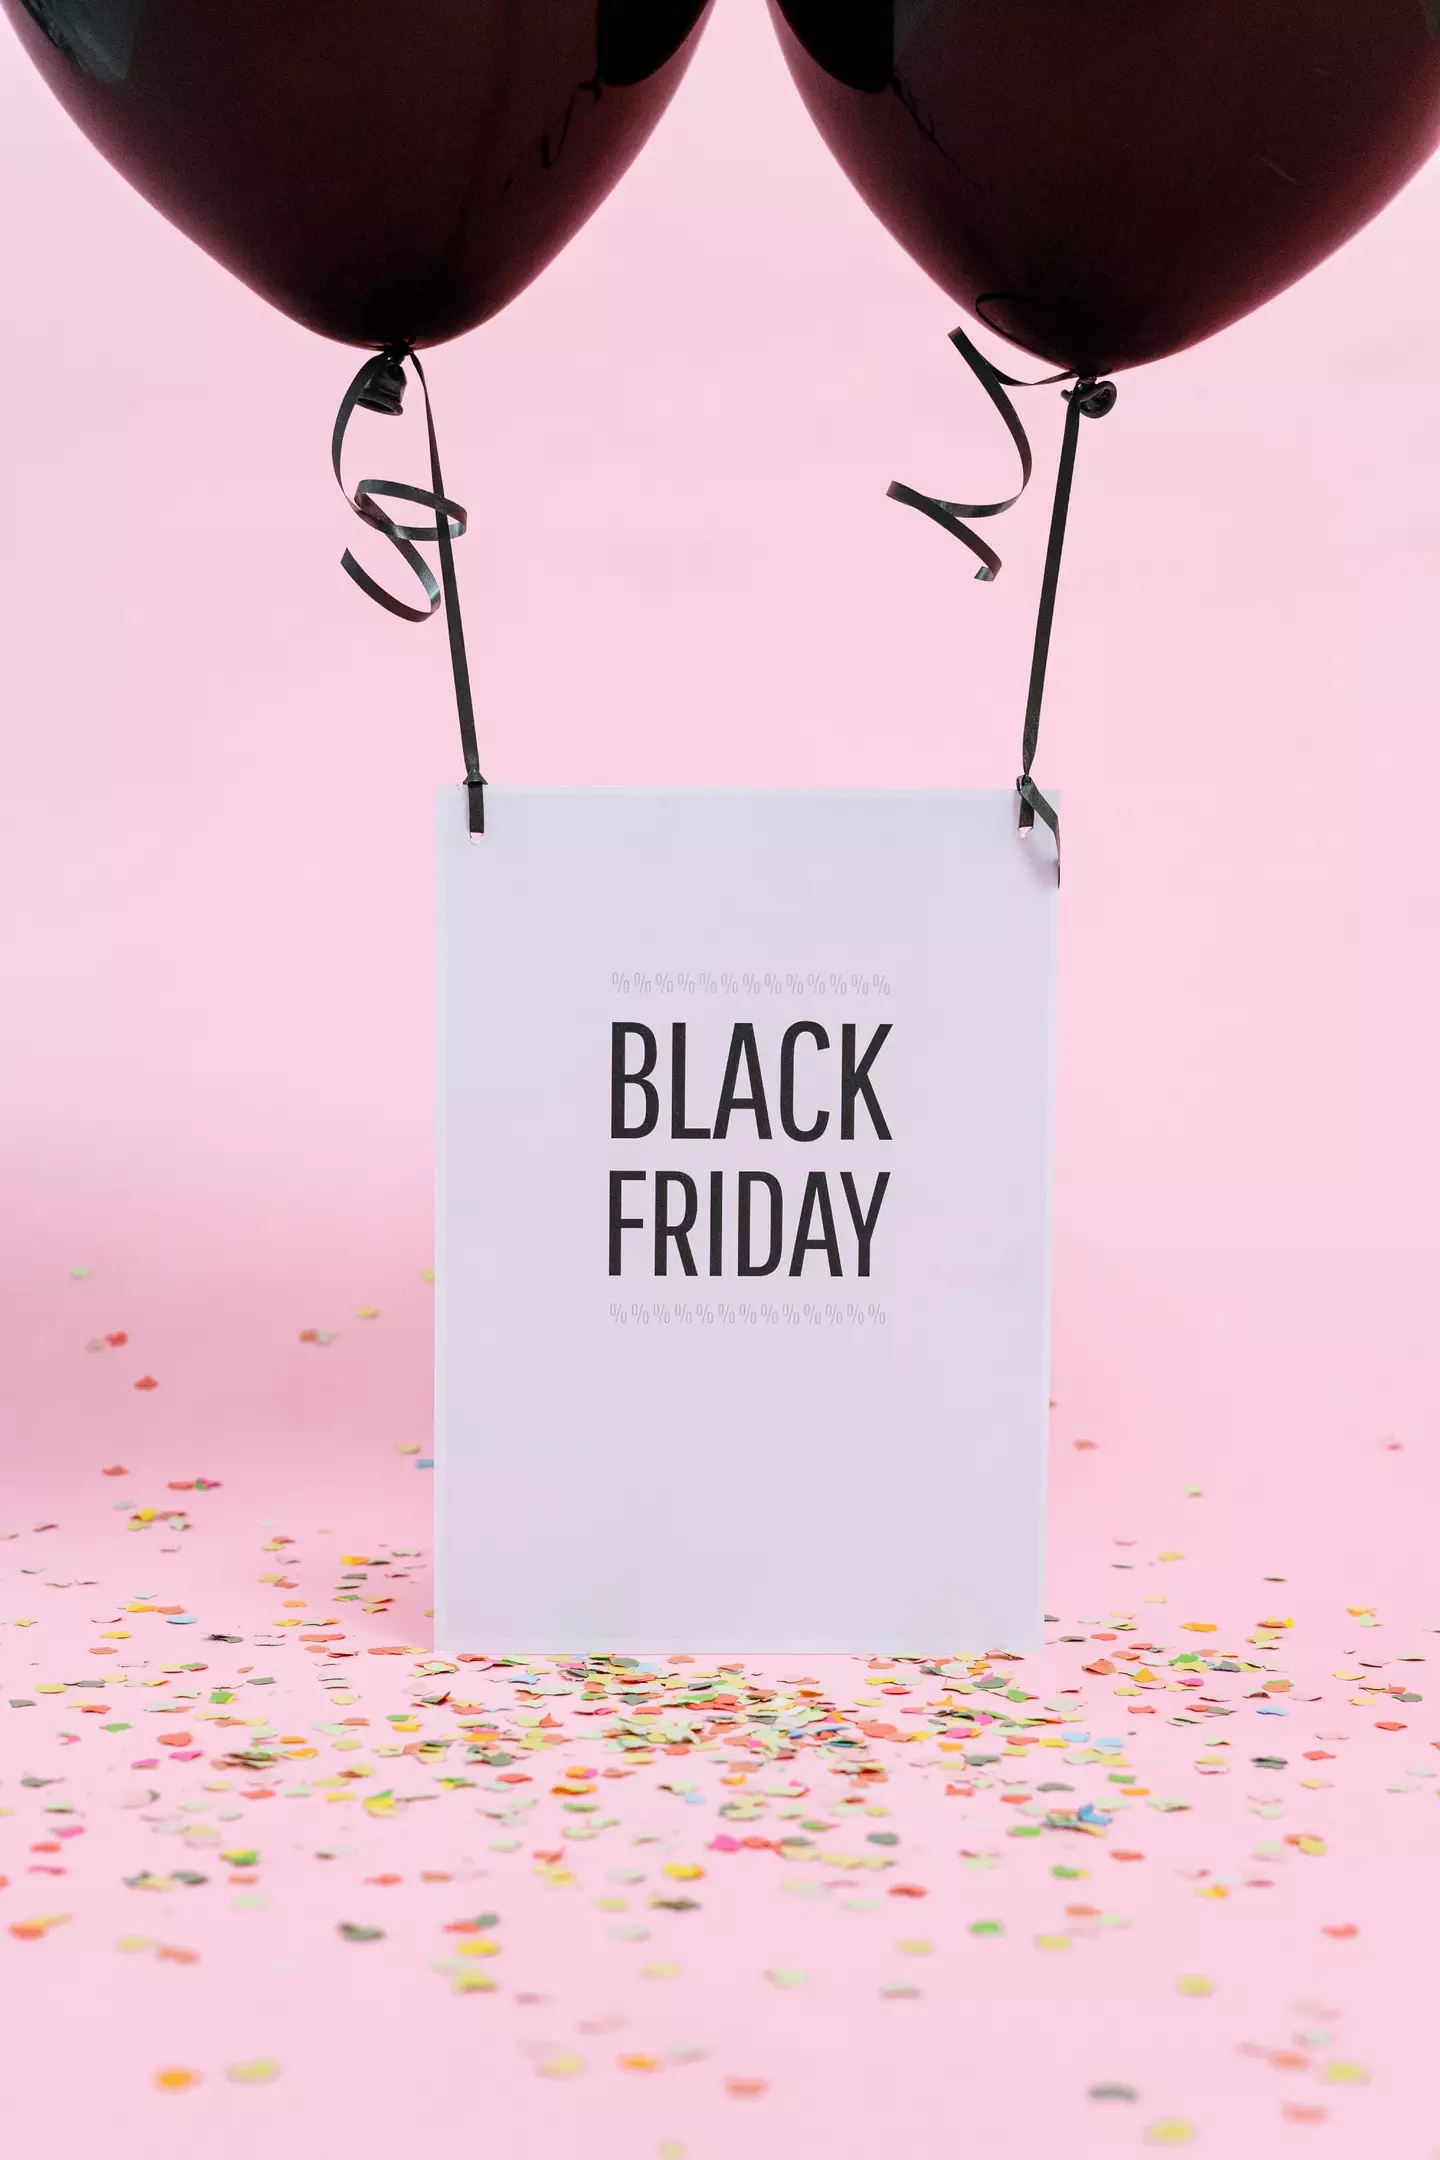 Retailers will be launching their Black Friday offers soon.